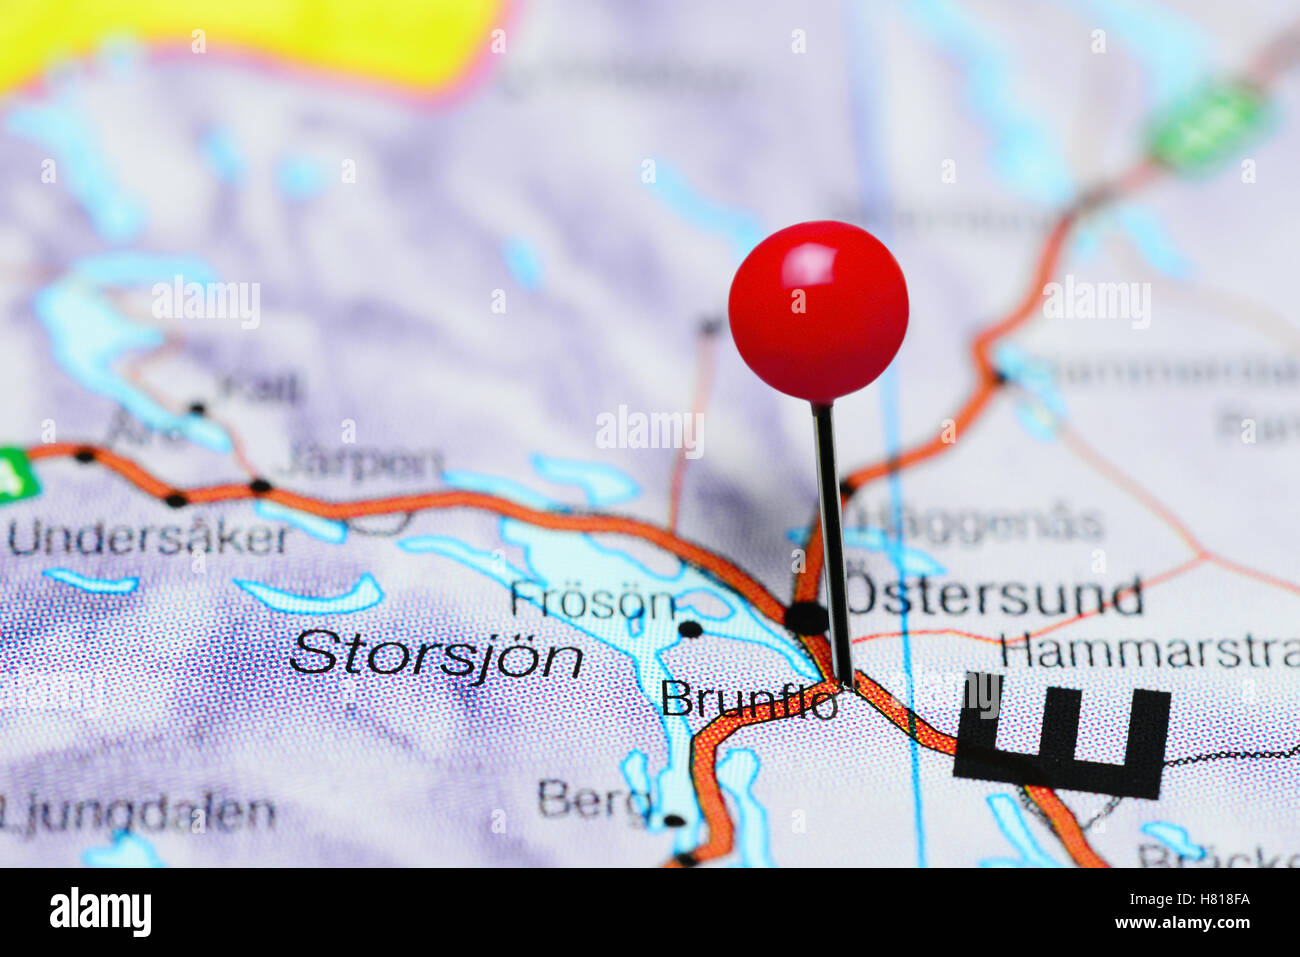 Brunflo pinned on a map of Sweden Stock Photo